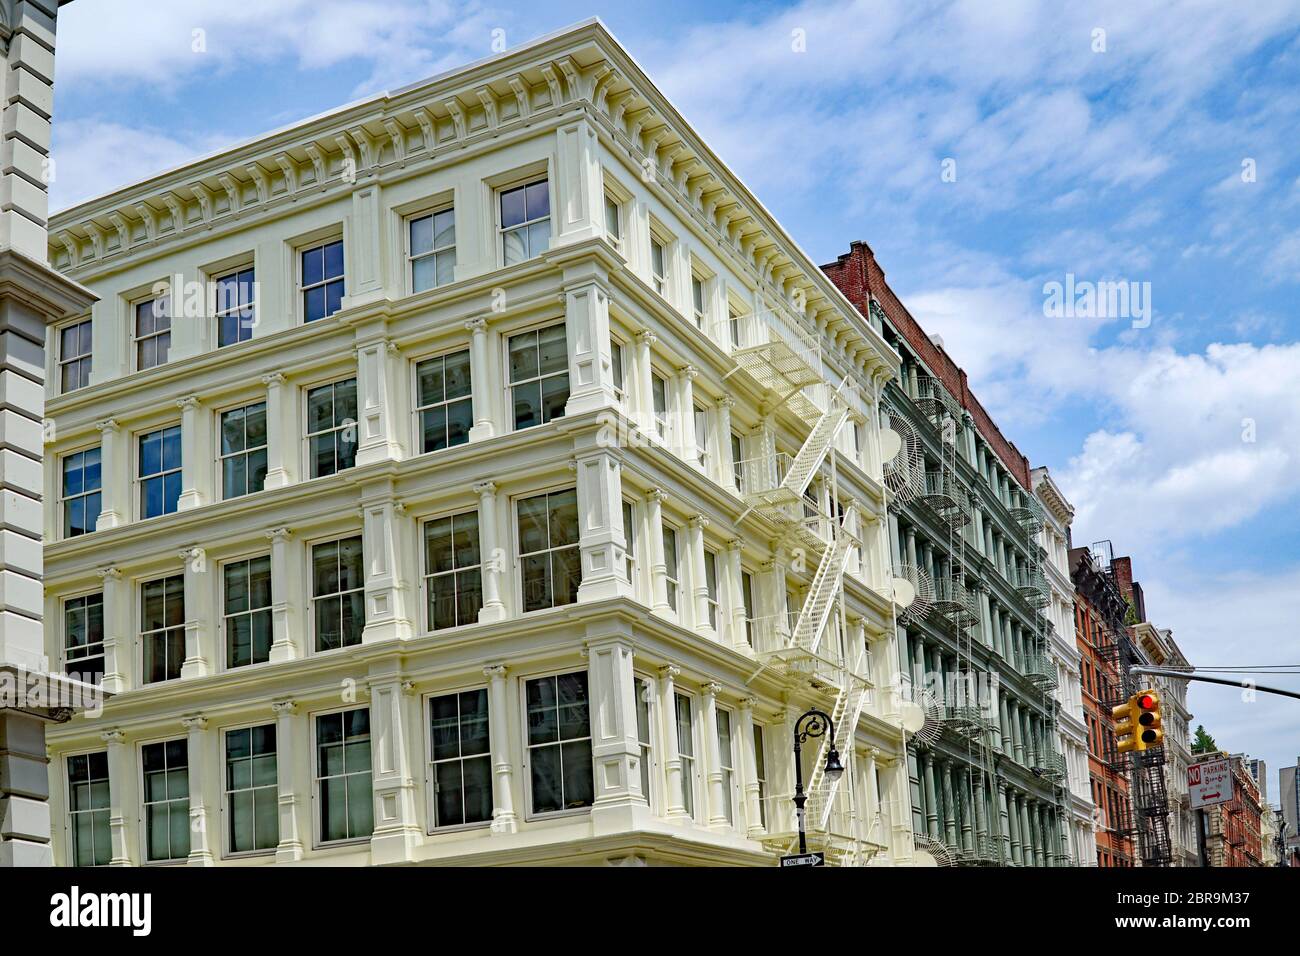 New York City, Manhattan Cast Iron District, colorful painted buildings Stock Photo